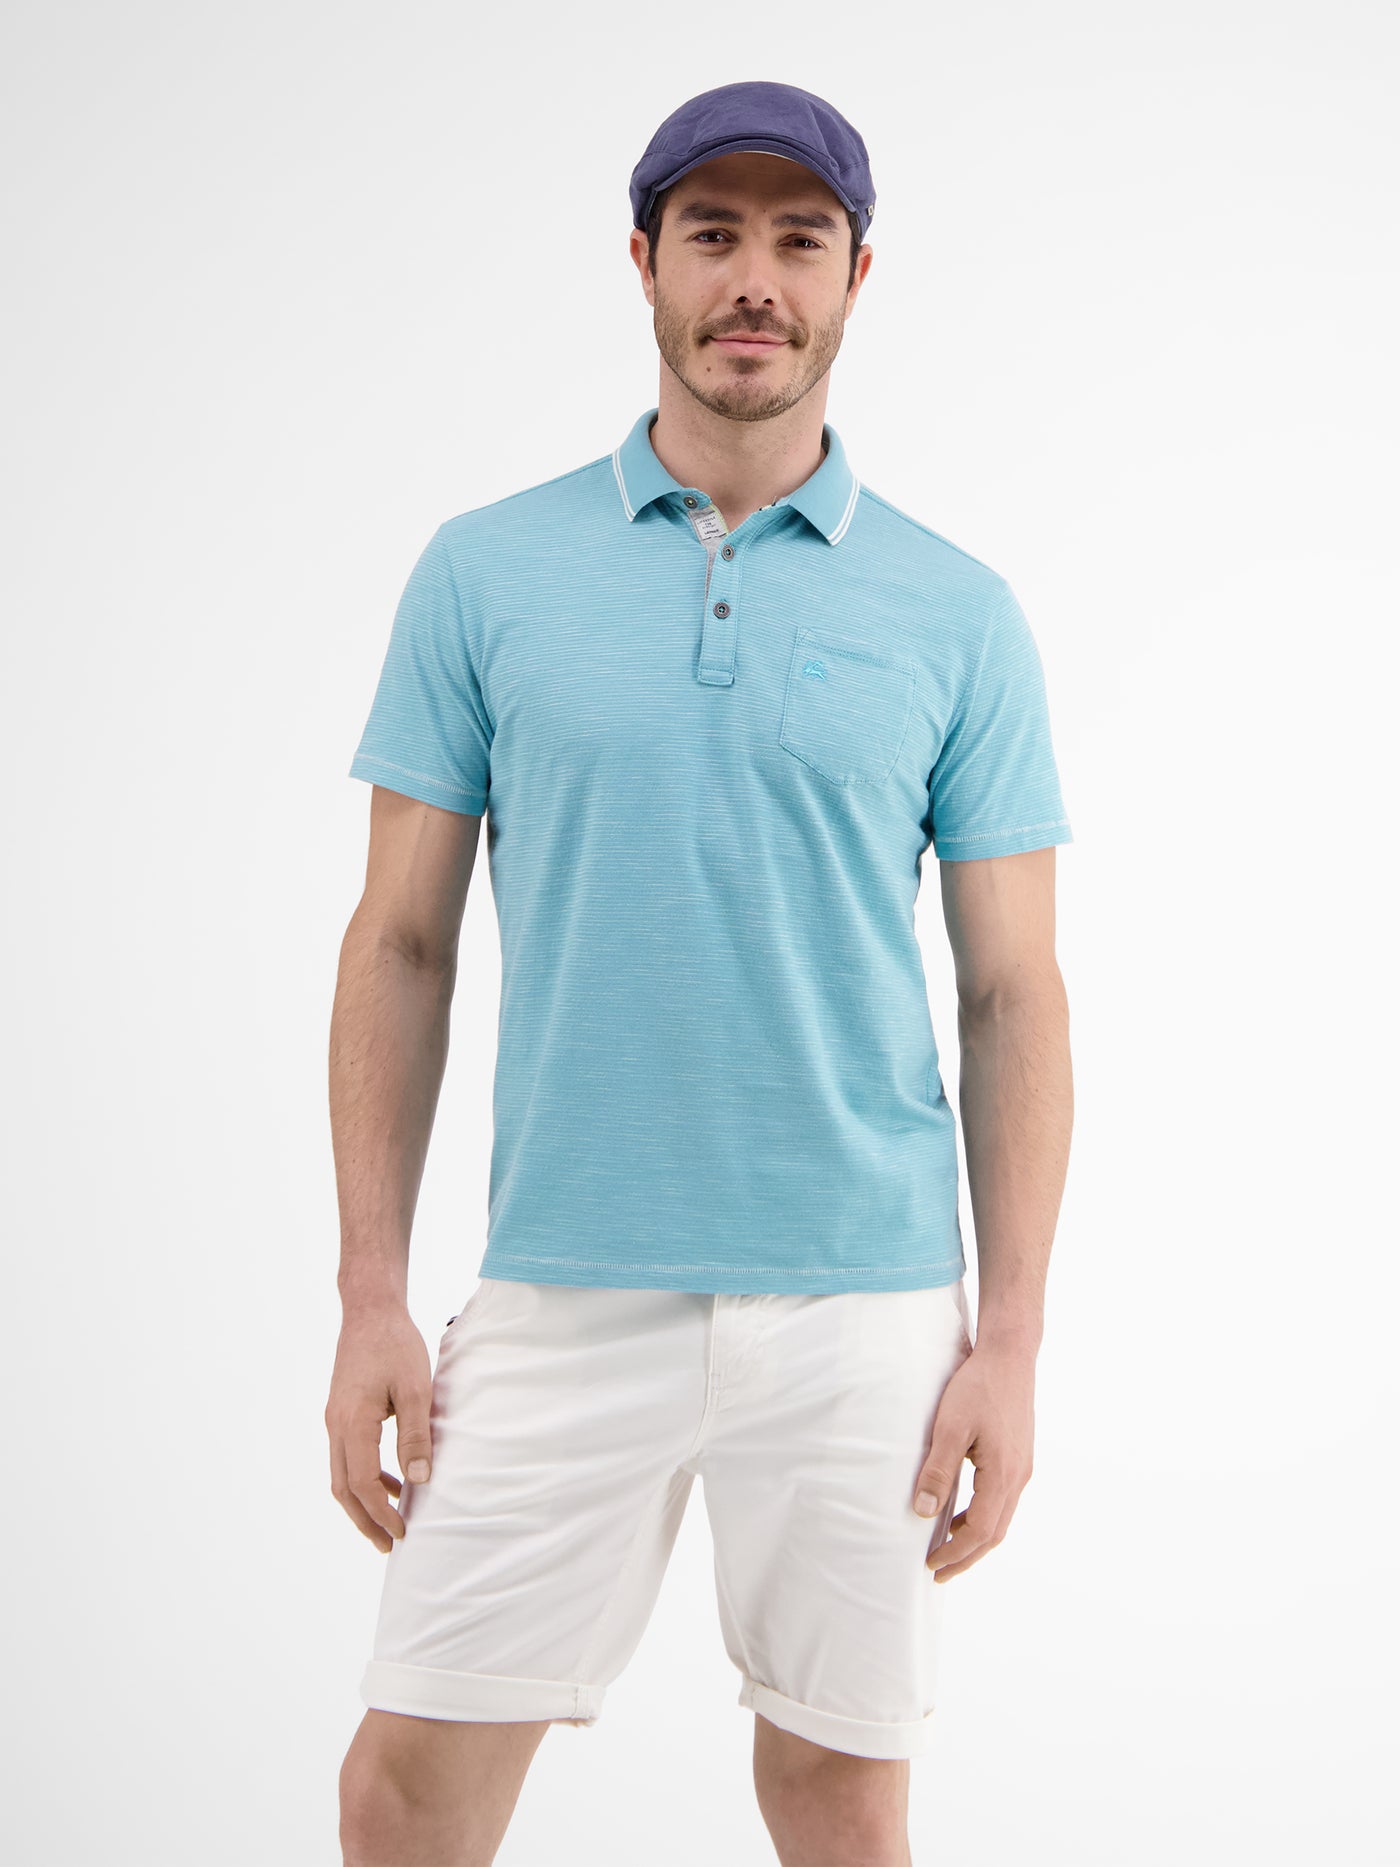 Polo shirt with fineliner – LERROS SHOP stripes